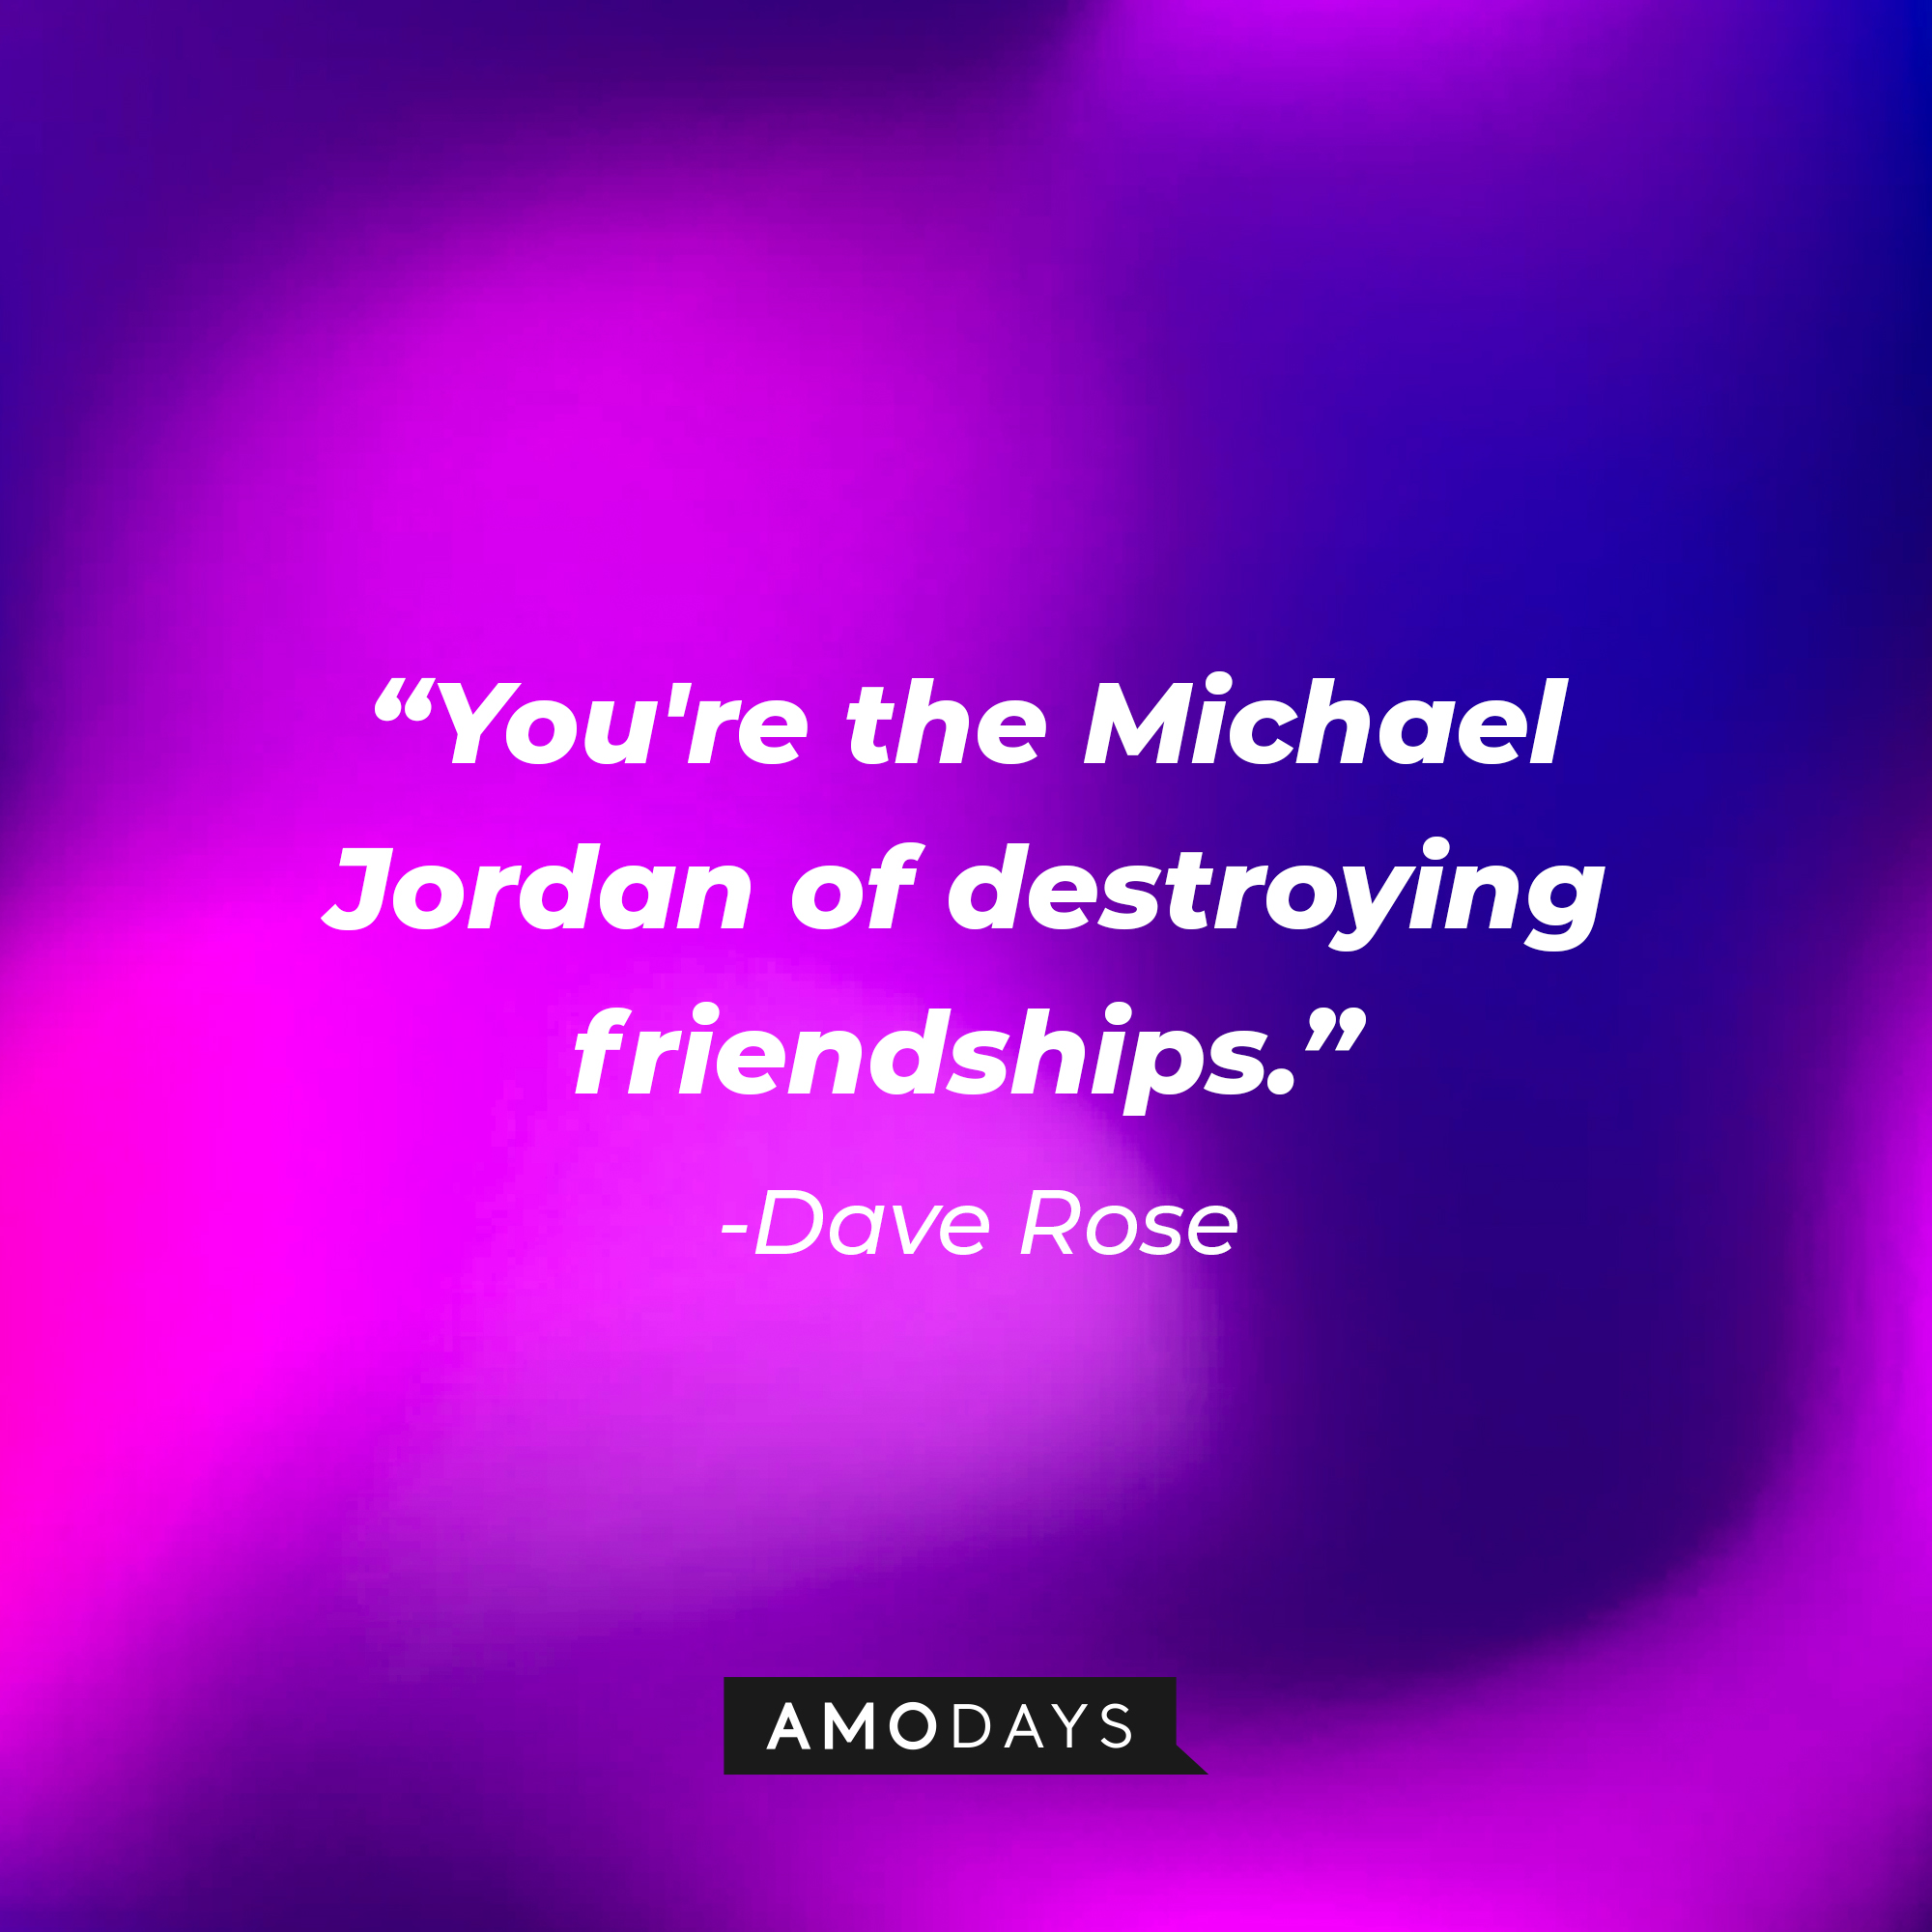 Dave Rose's quote, "You're the Michael Jordan of destroying friendships." | Source: Facebook/HappyEndings